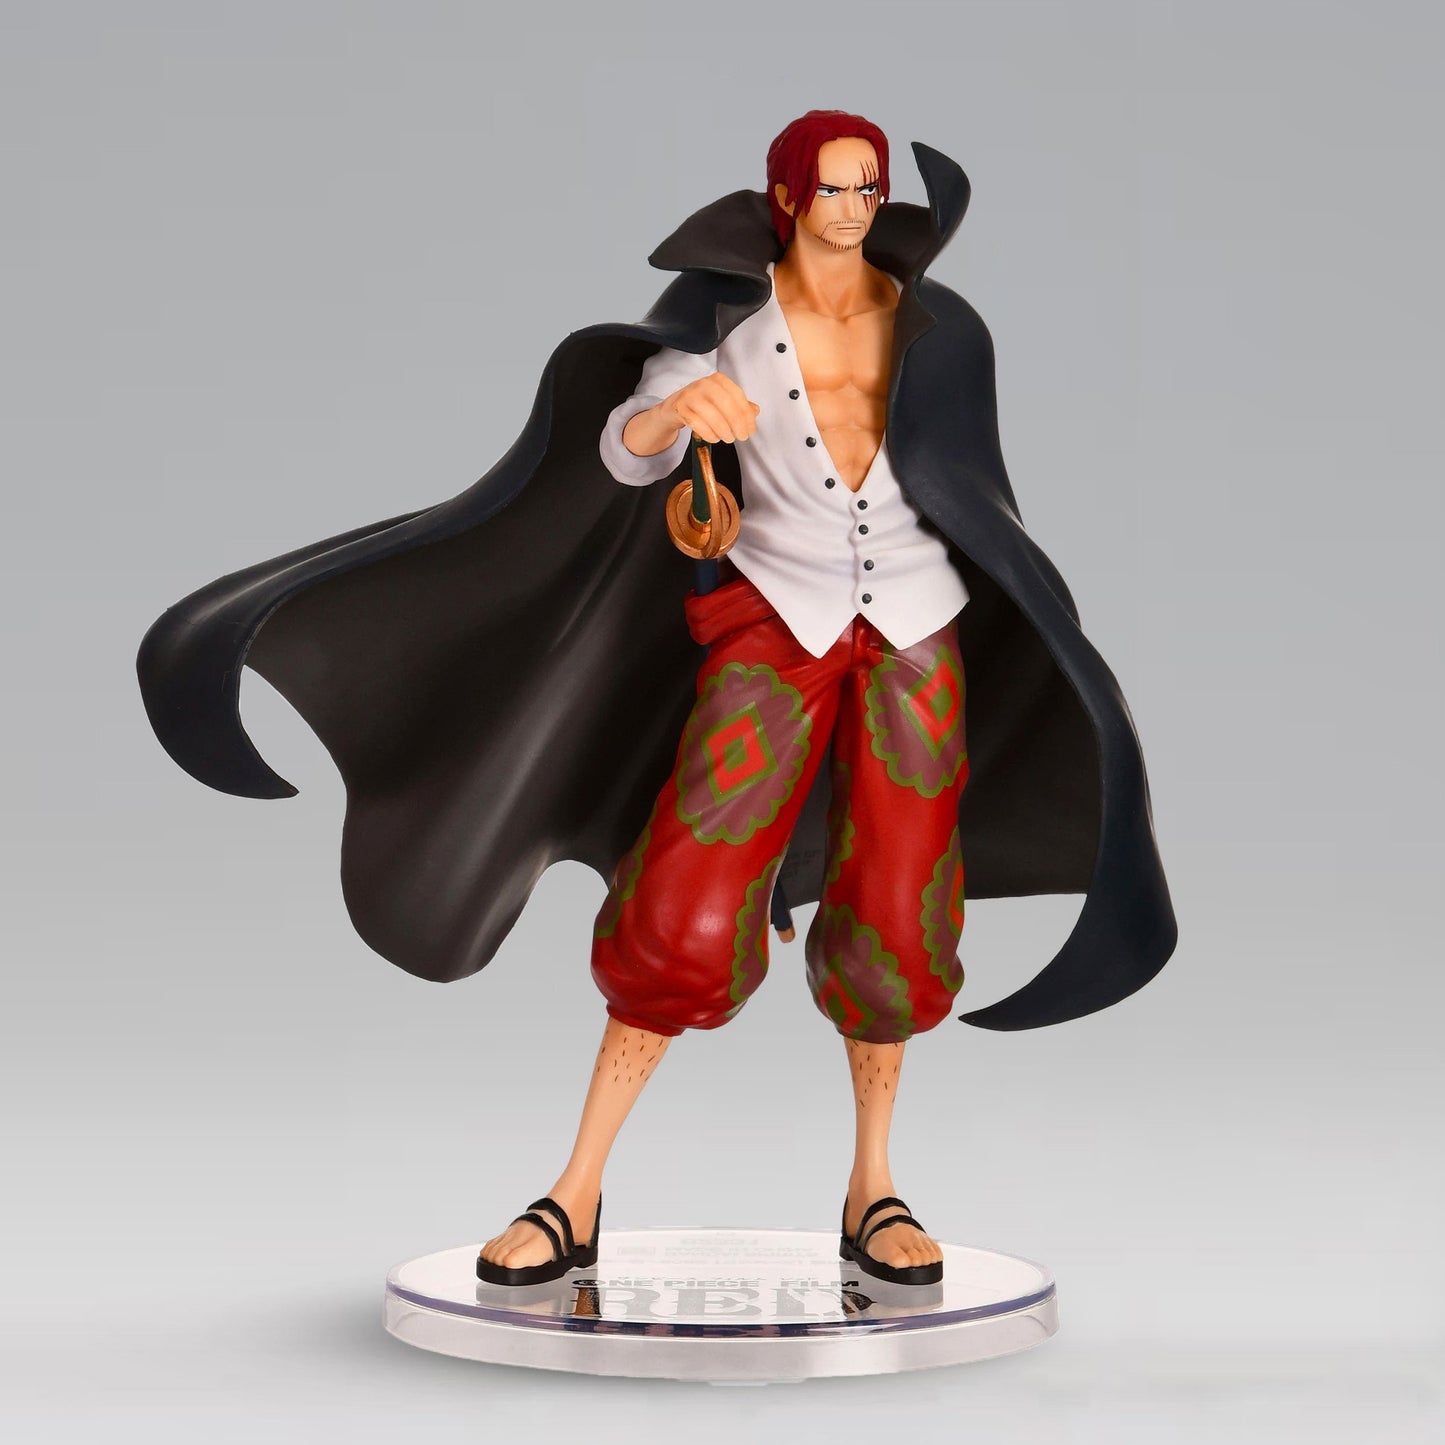 Shanks Action Figure One Piece  Anime Figures One Piece Shanks